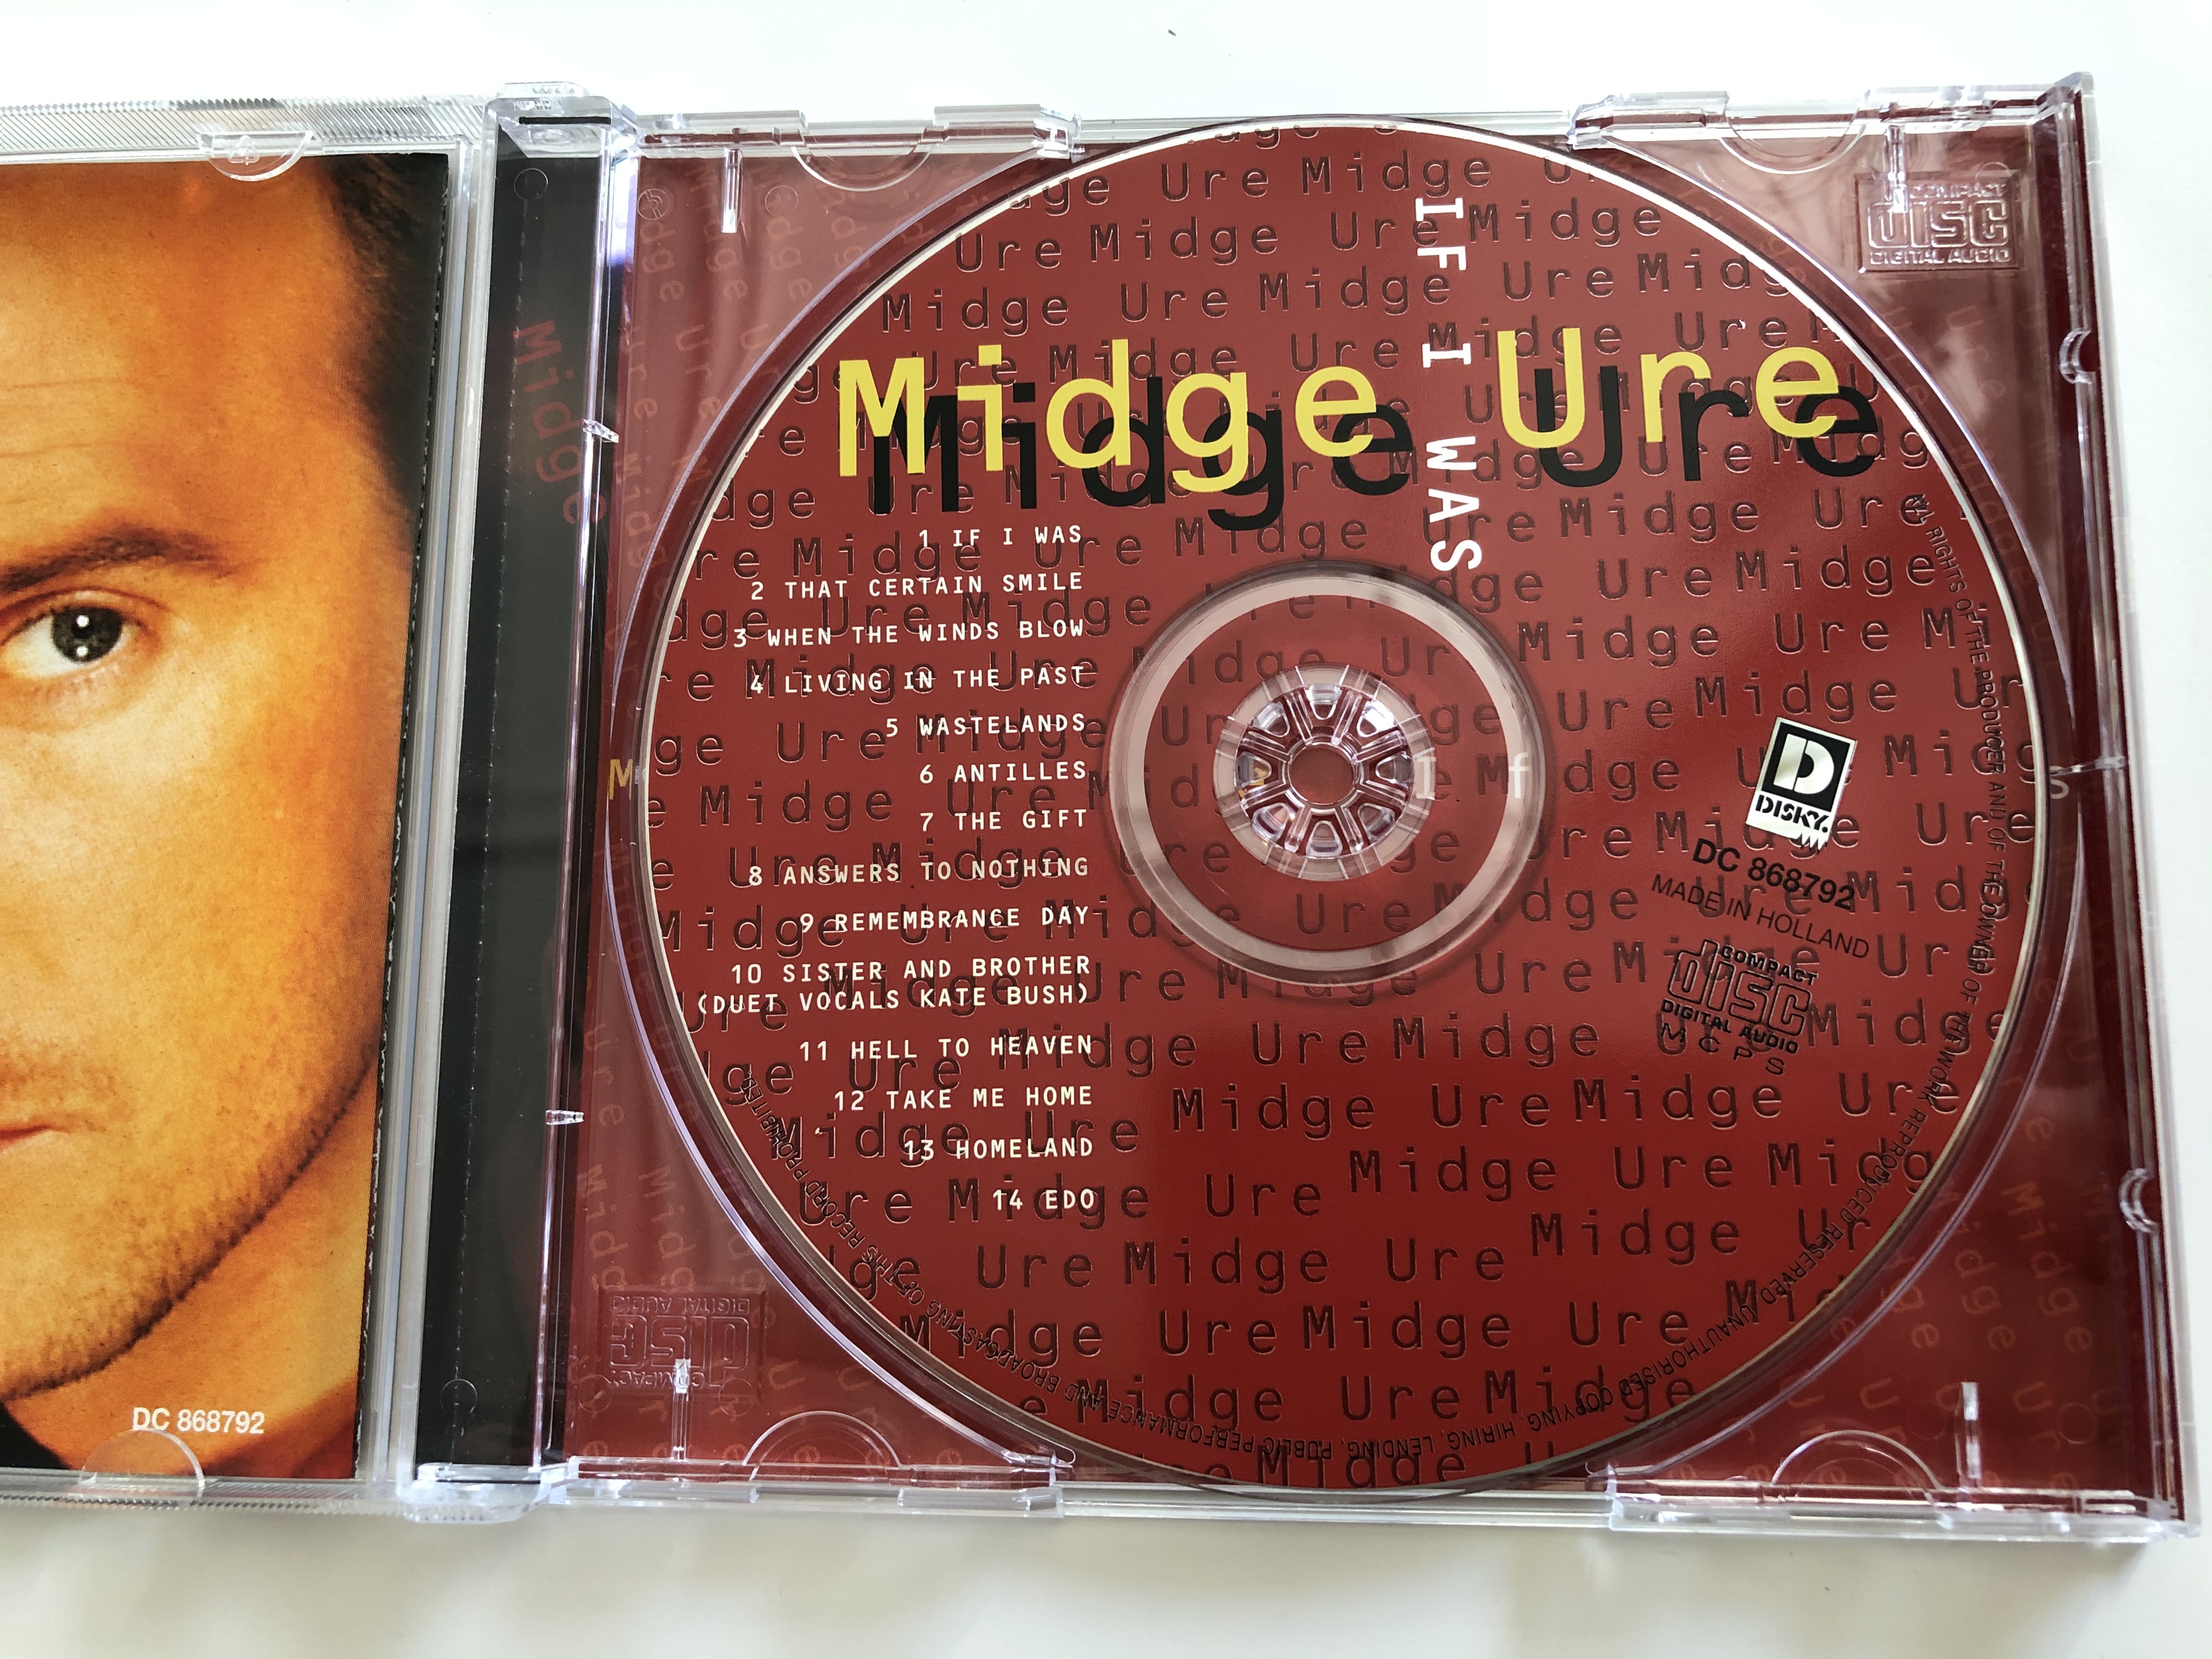 midge-ure-if-i-was-that-certain-smile-wastelands-answers-to-nothing-disky-audio-cd-1997-dc-868792-3-.jpg